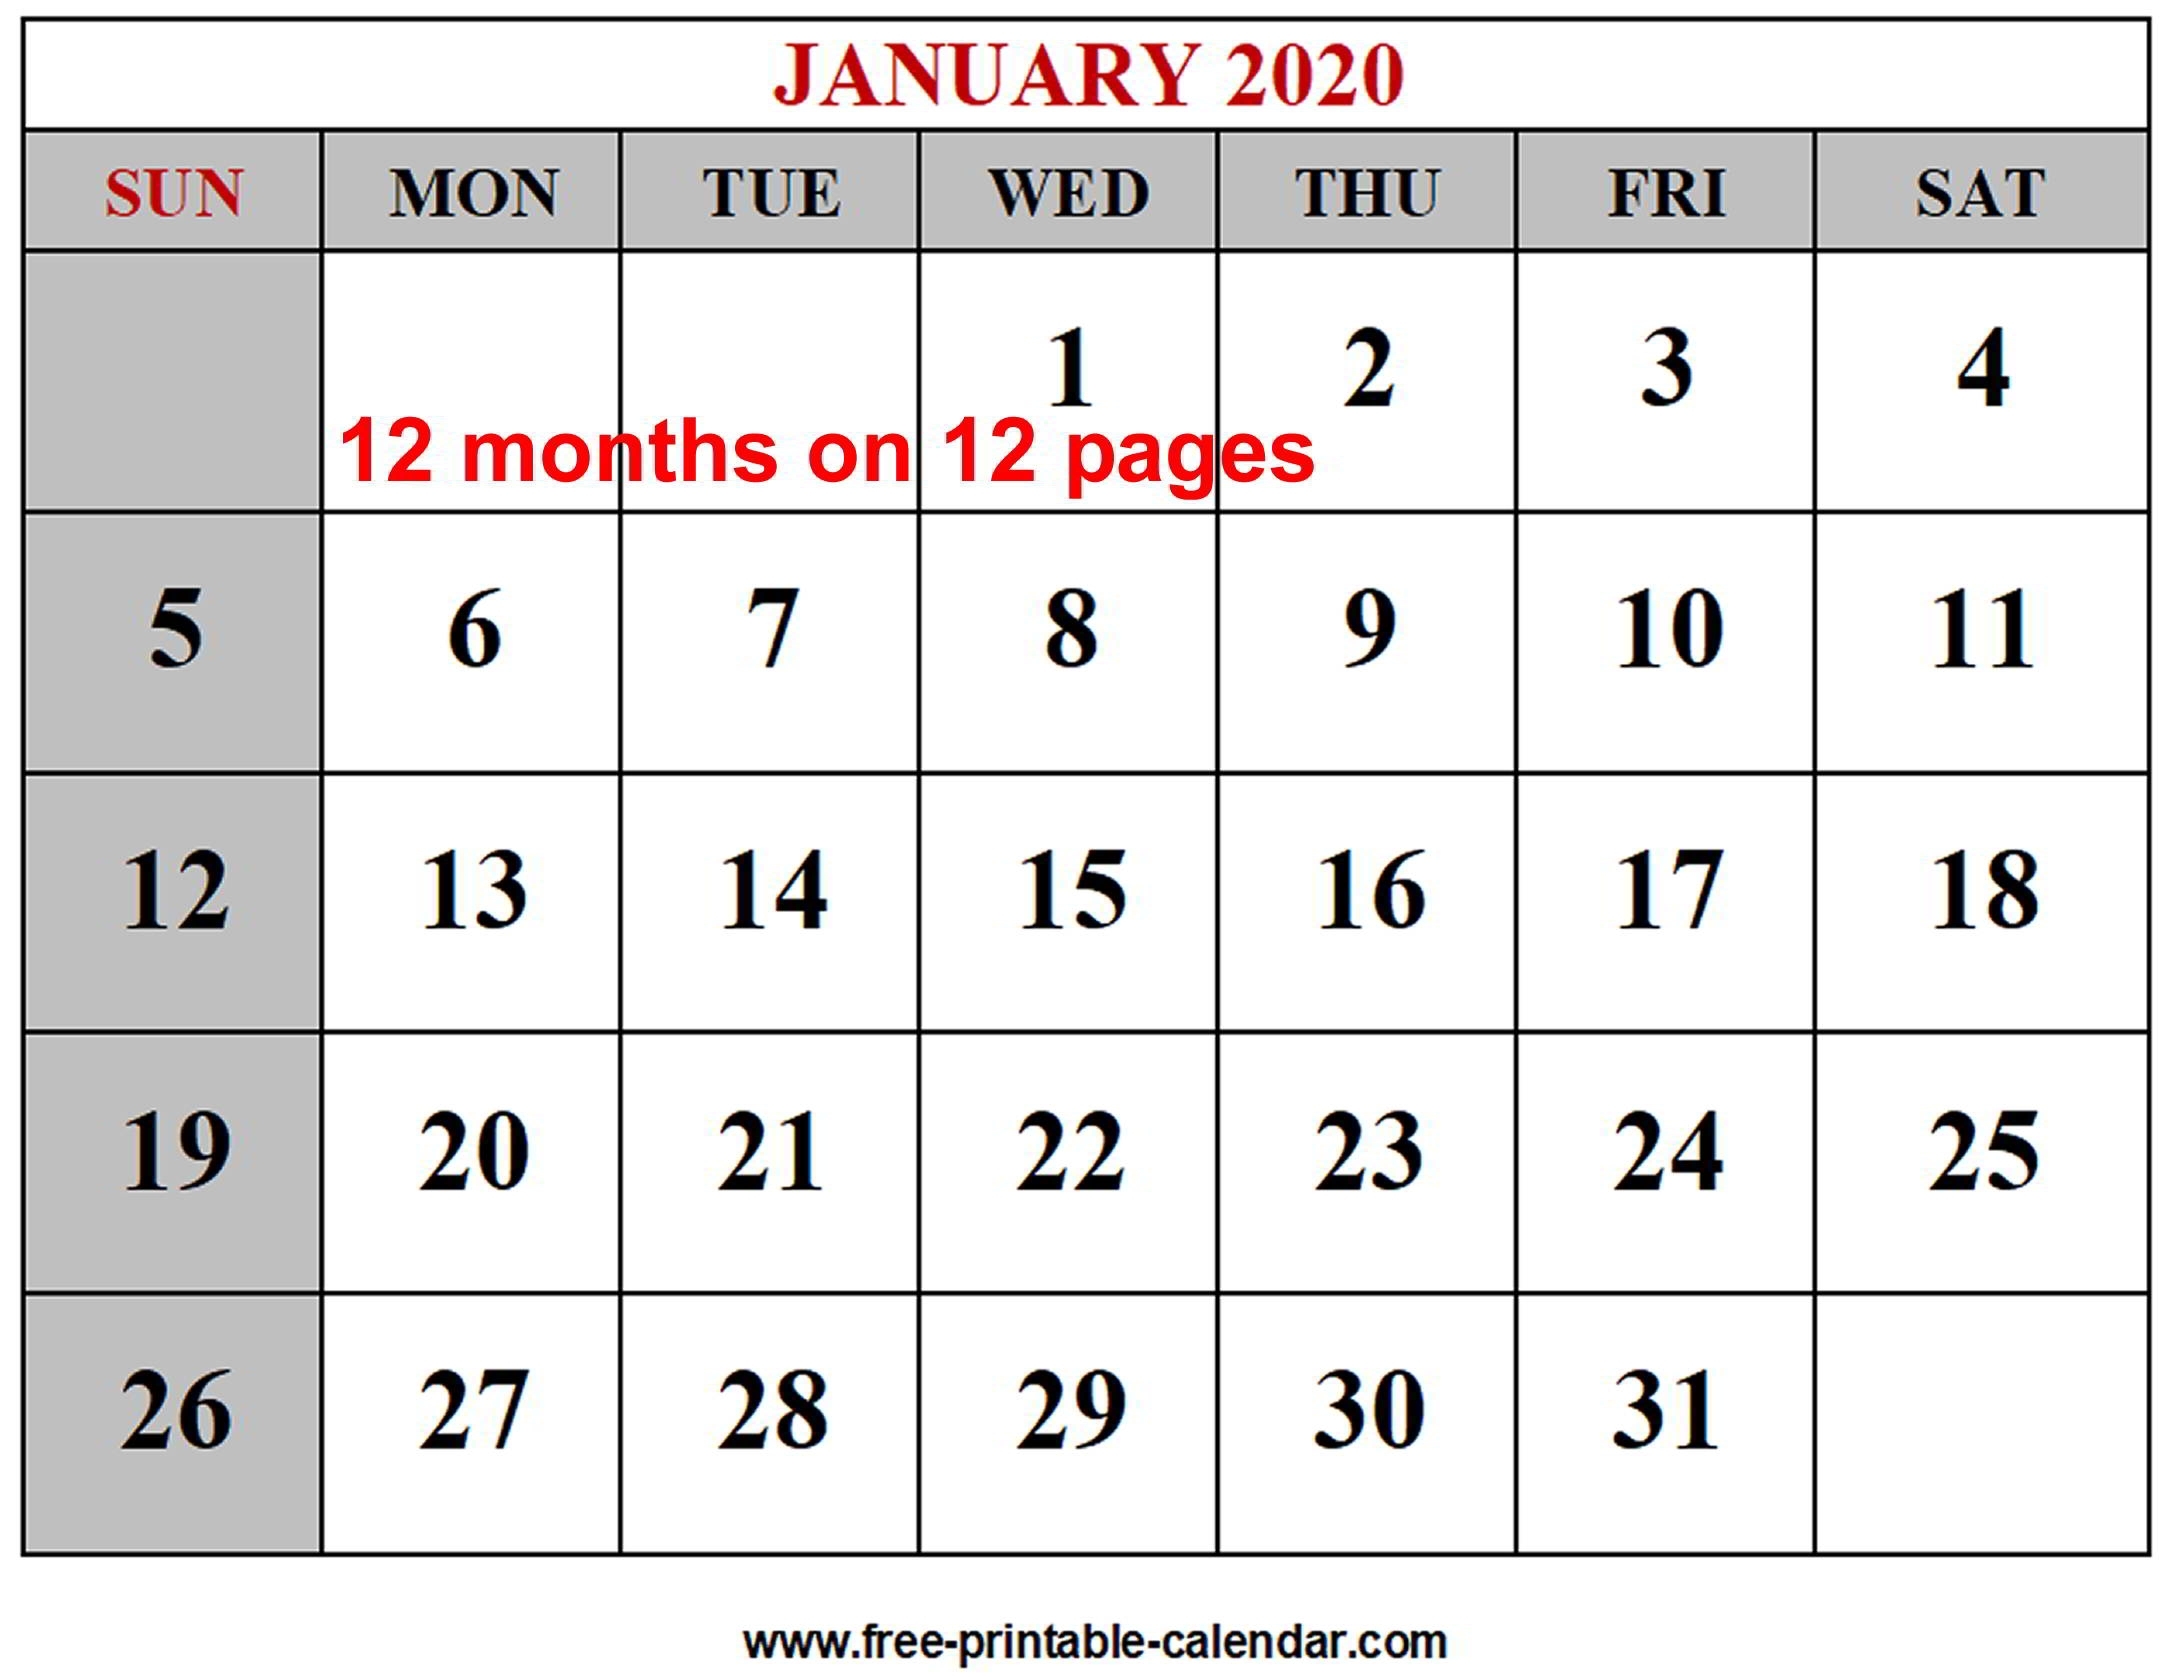 Year 2020 Calendar Templates - Free-Printable-Calendar within 2020 Free Monthly Calendars To Print